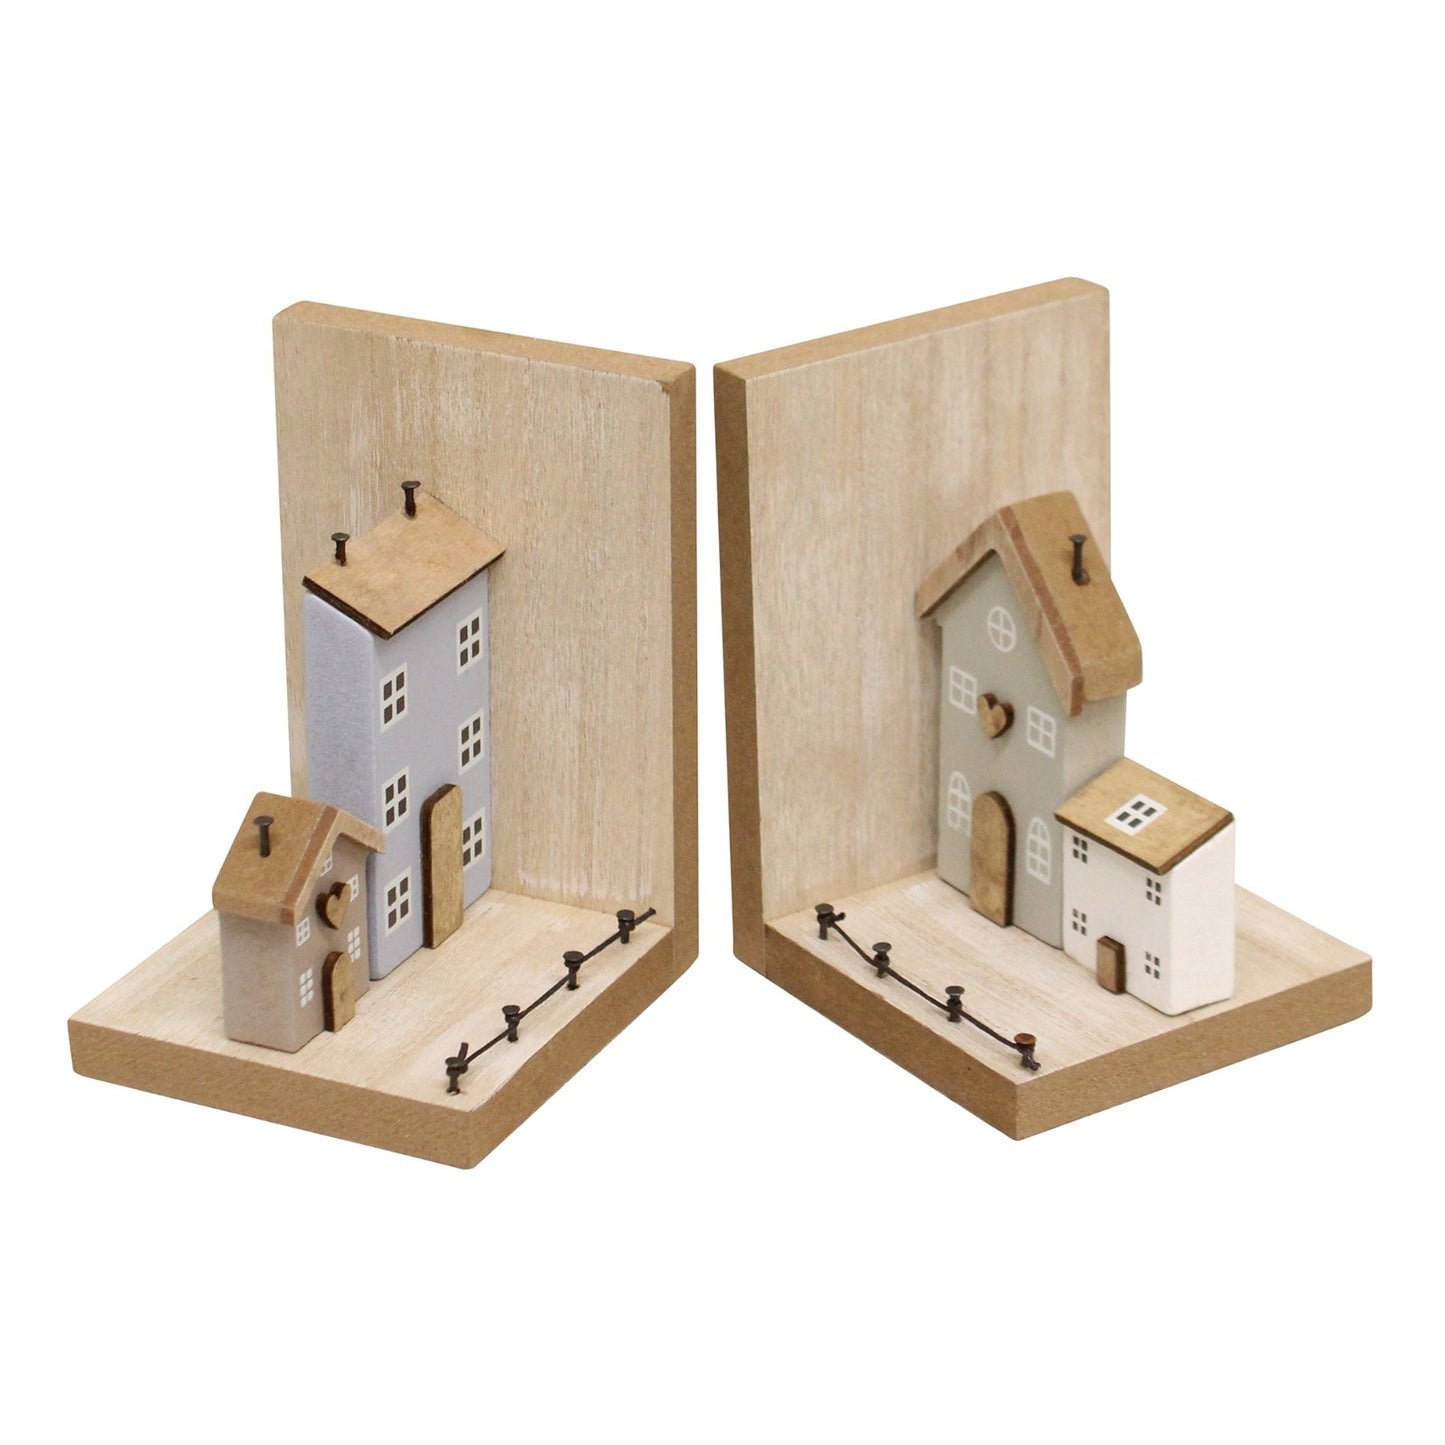 Pair of Bookends, Wooden Houses Design